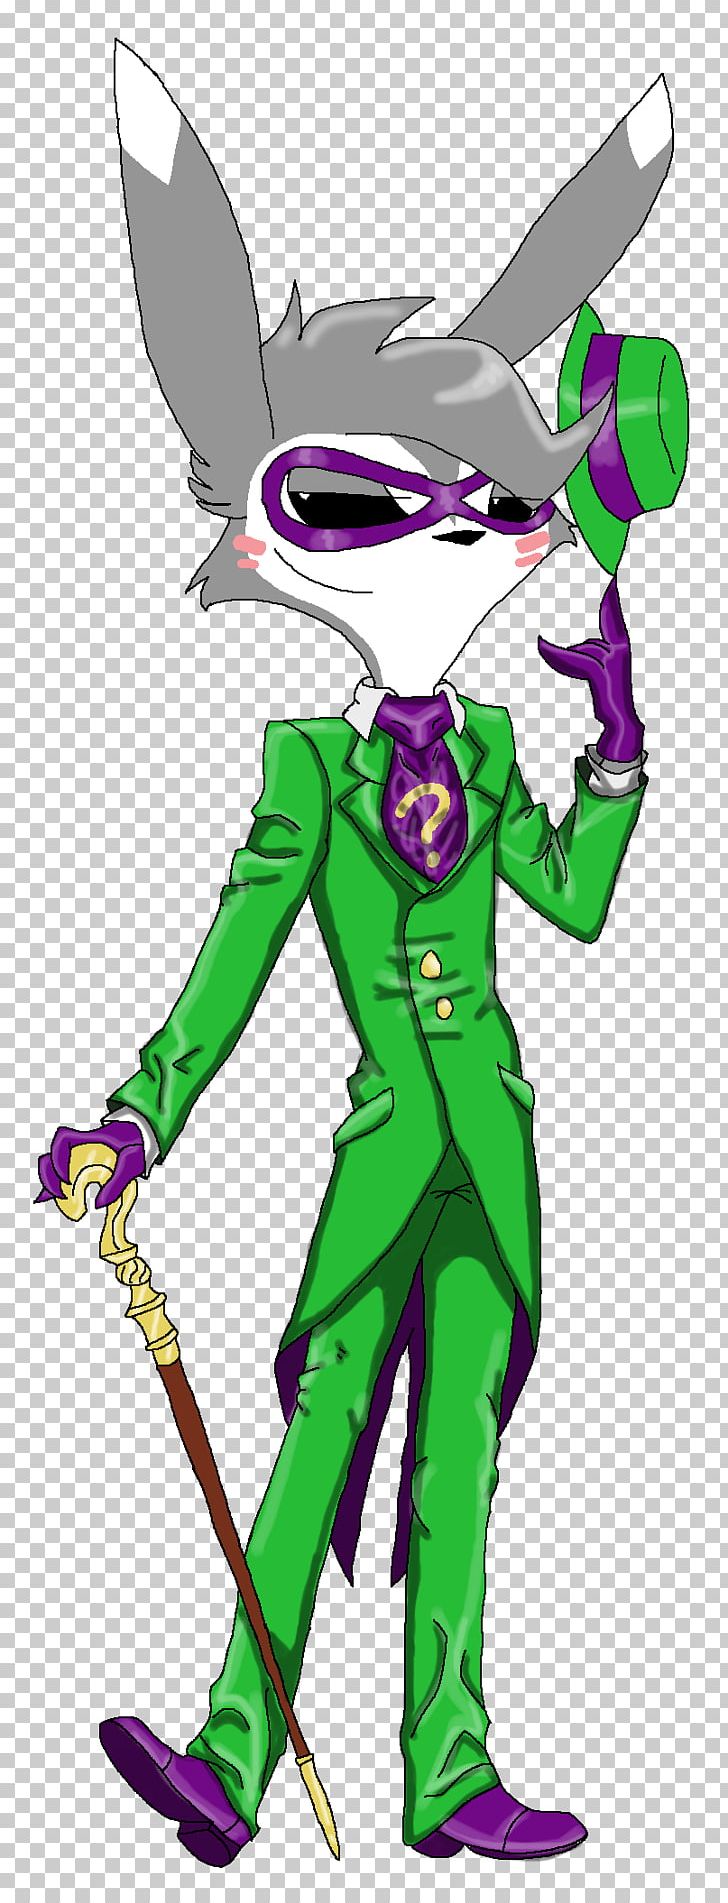 Costume Design Supervillain PNG, Clipart, Art, Cartoon, Costume, Costume Design, Fictional Character Free PNG Download